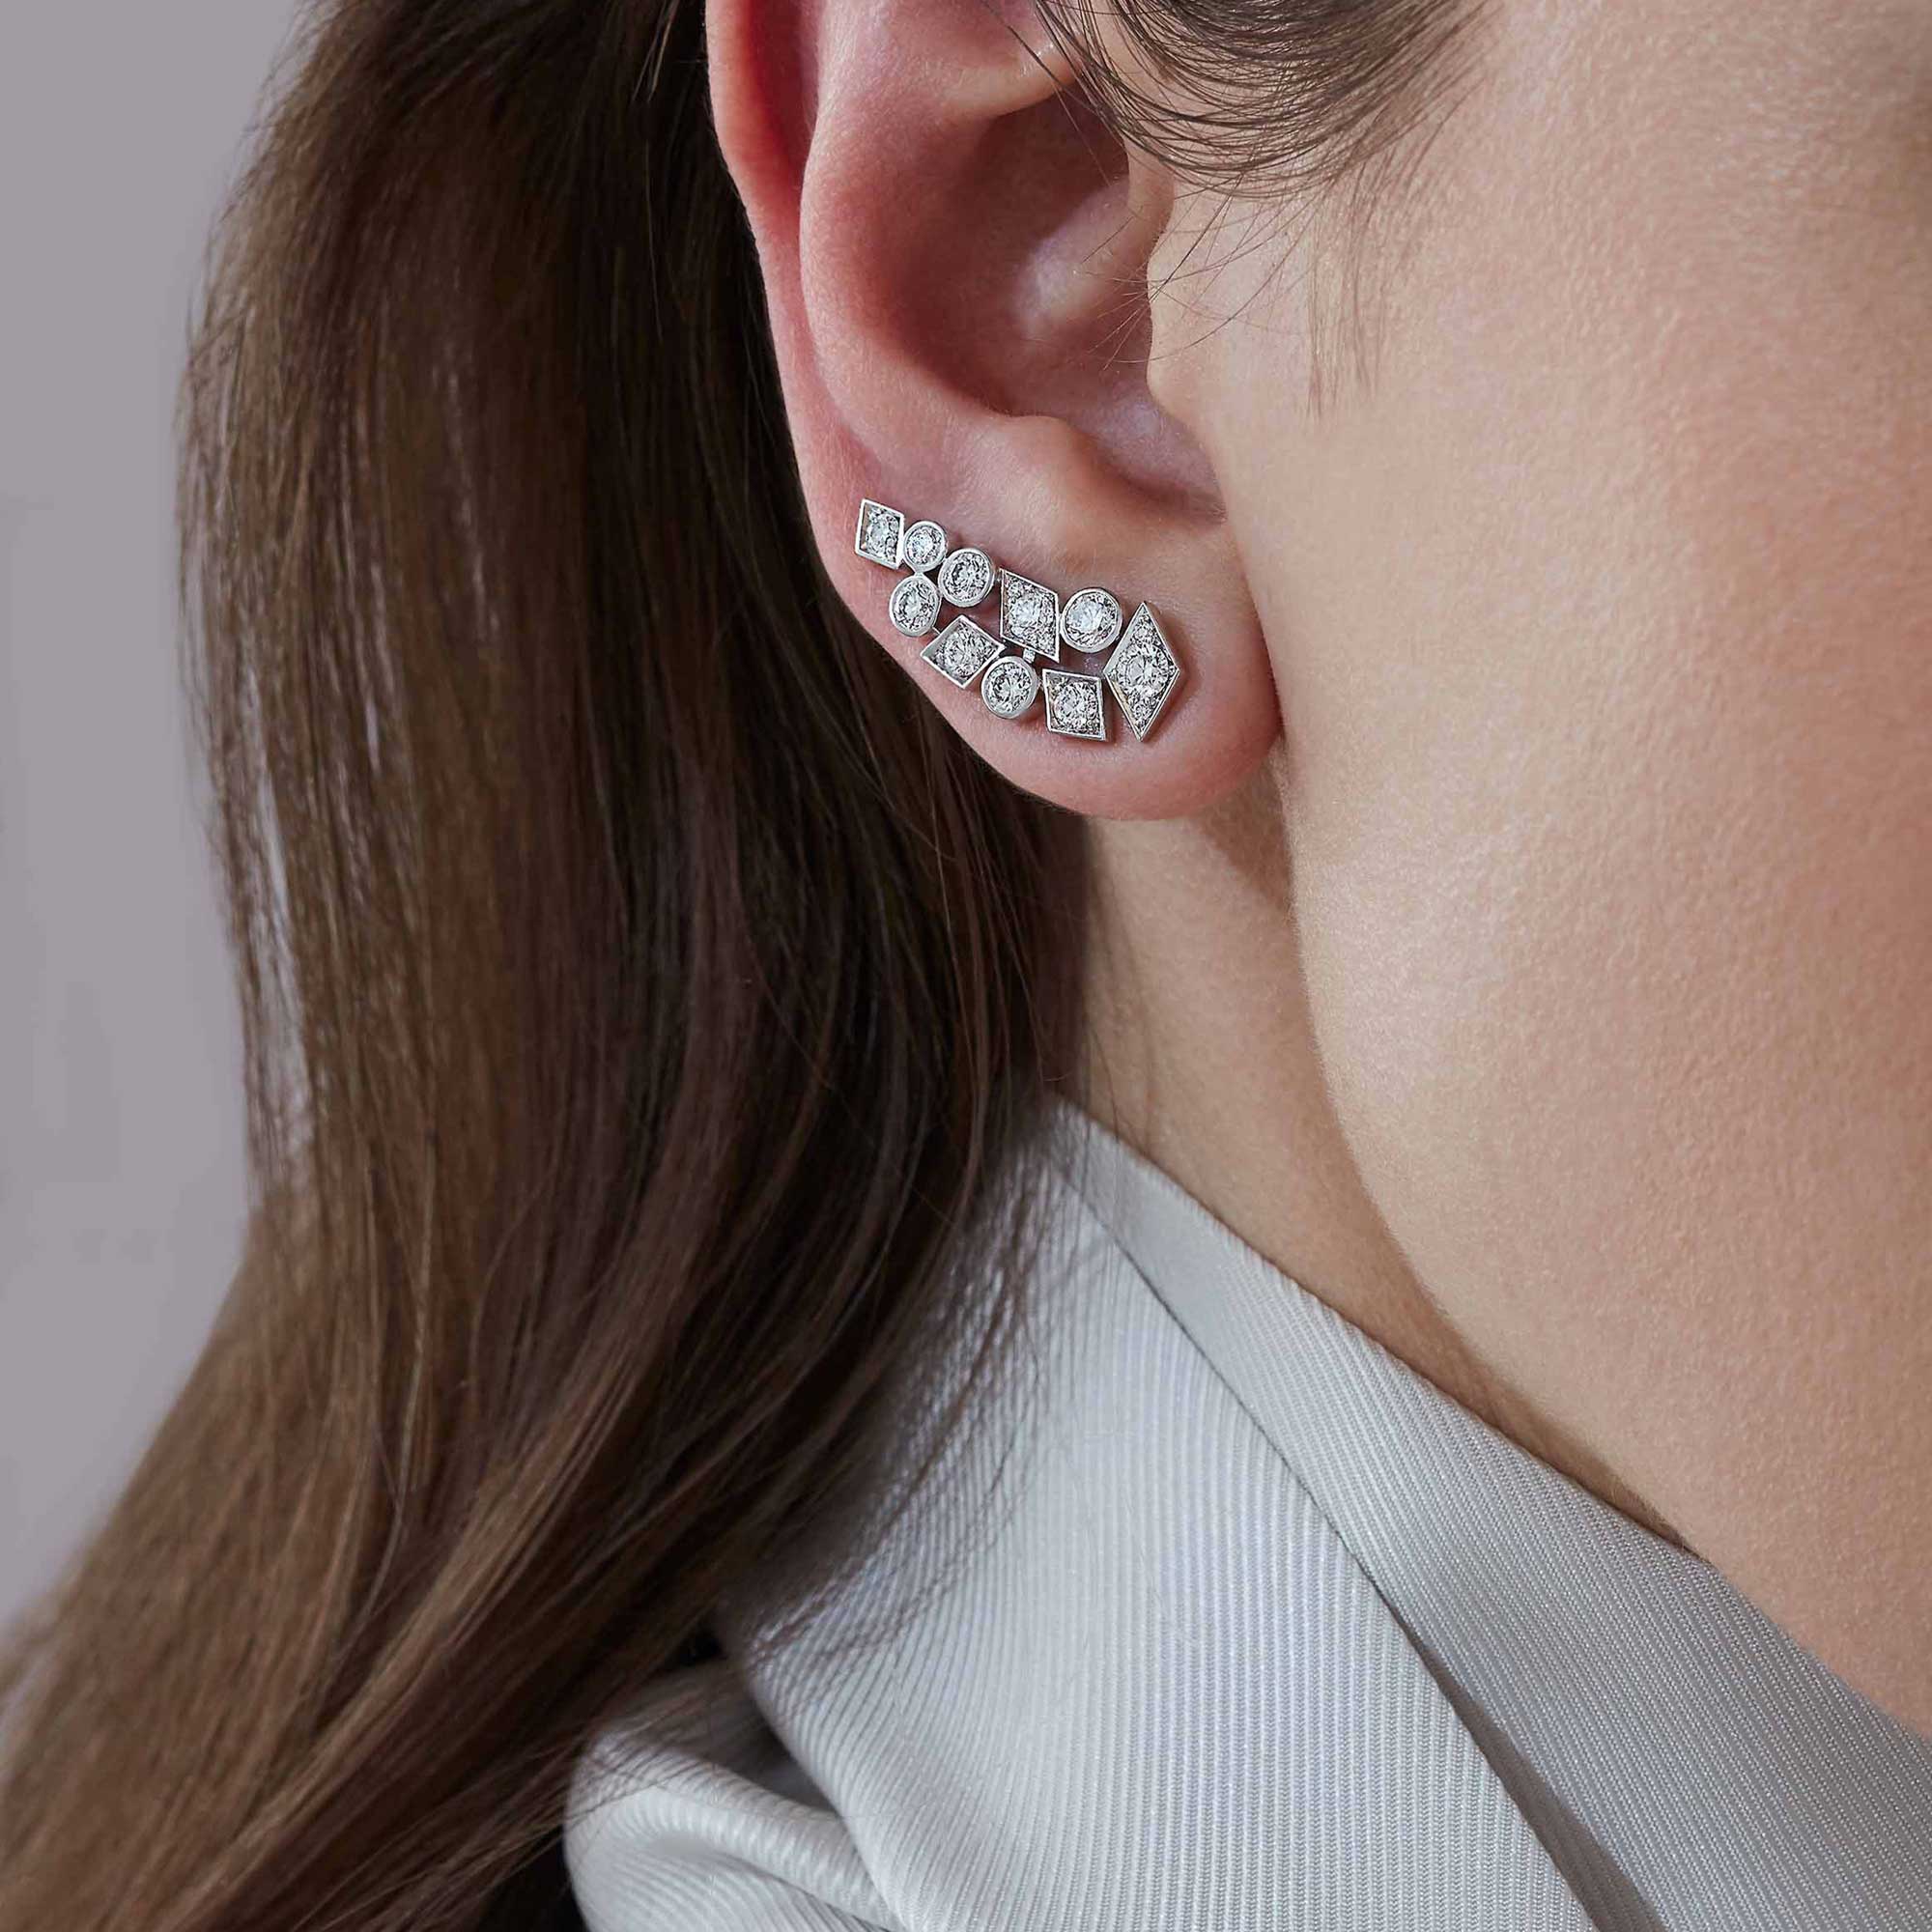 Garrard Albemarle jewellery Collection Diamond Ear Climbers In 18ct White Gold, 2017414, On Model